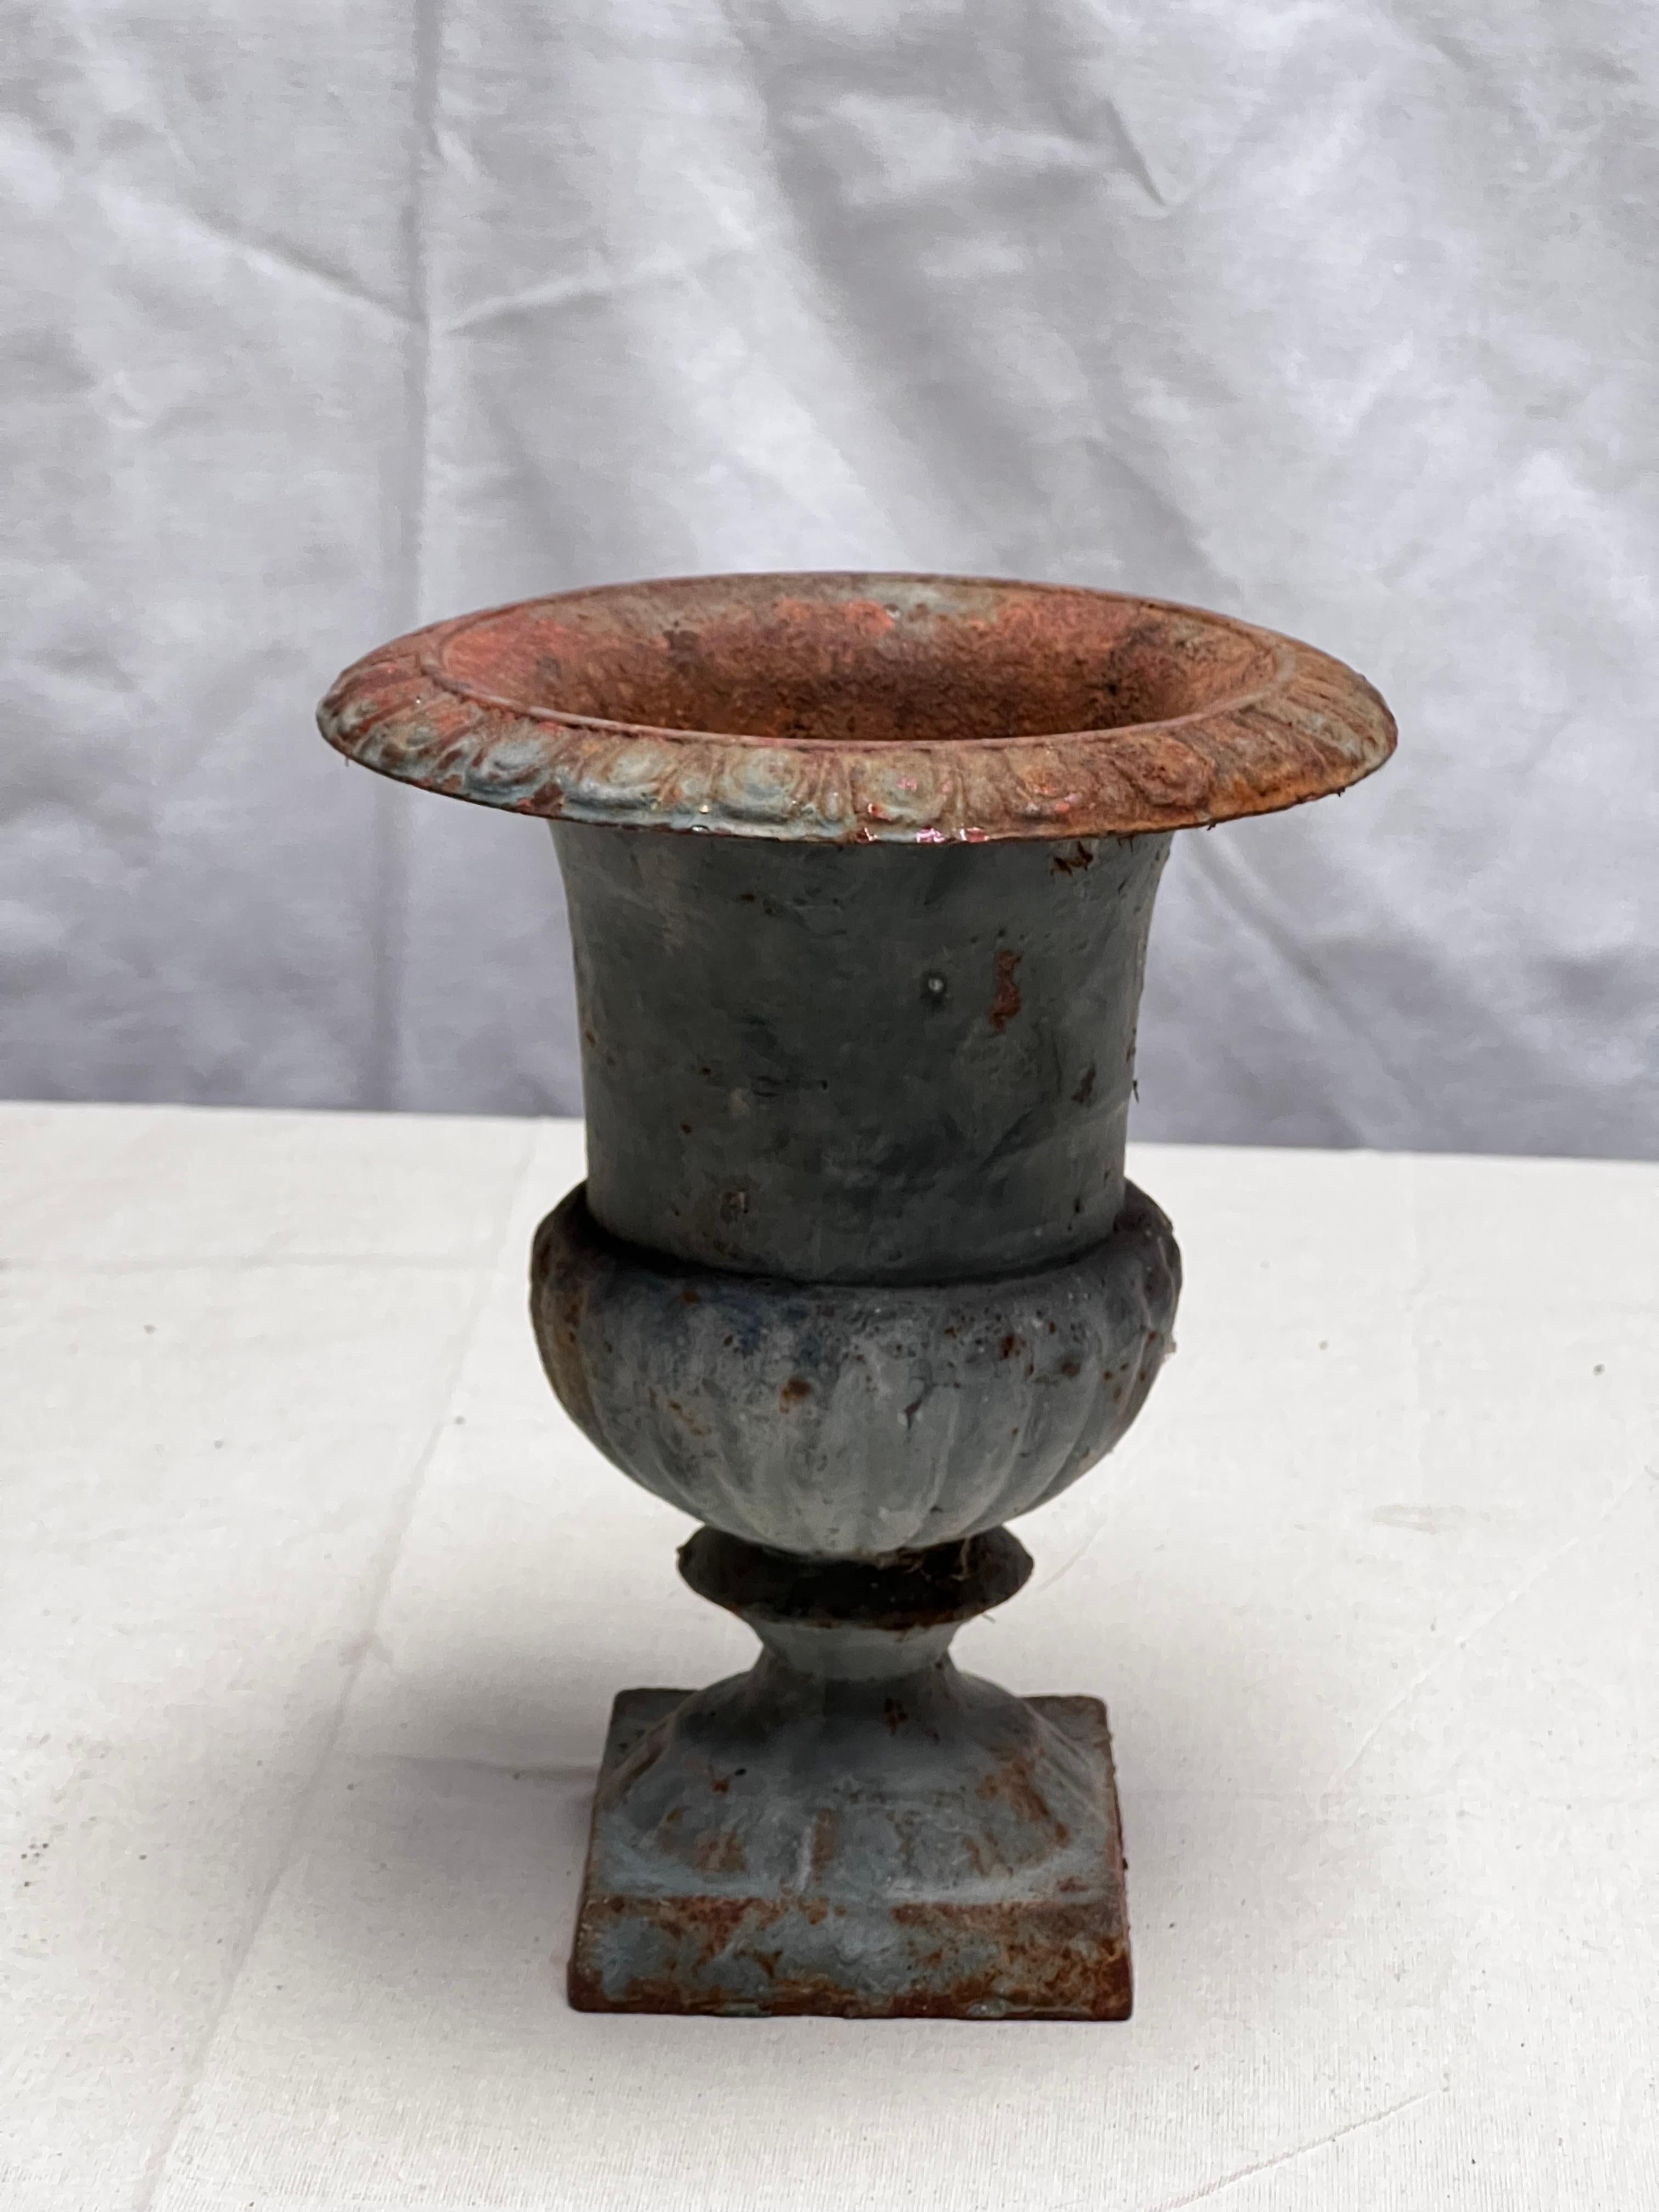 This is a very well preserved and patinated cast iron planter. Showing some patina from a past life in a garden. Could be used inside or outside in any rooms even in the bathroom. Very warm